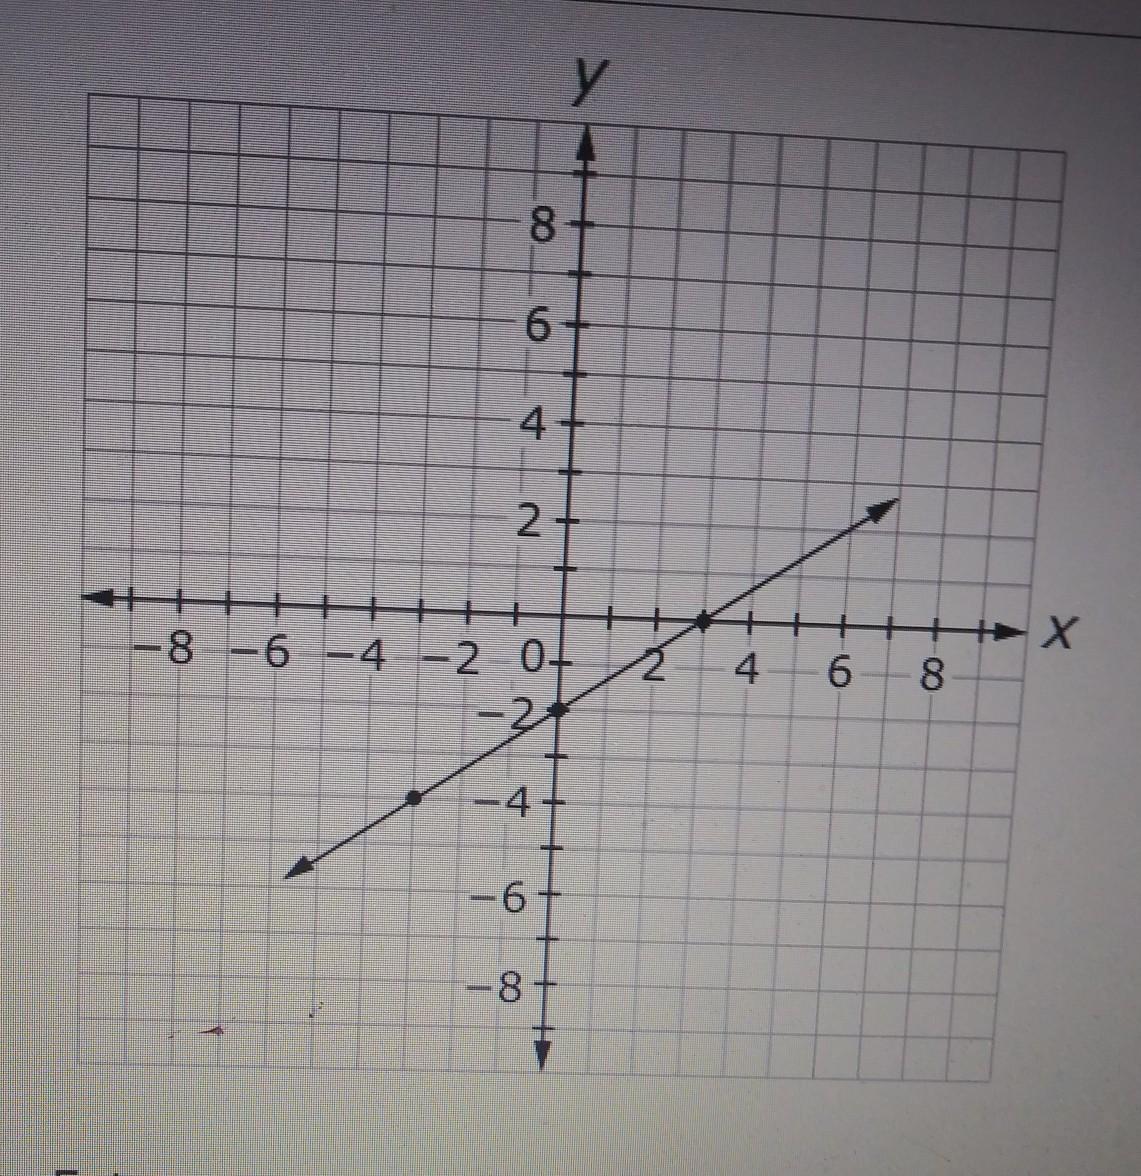 Enter An Equation In The Form Of Y = MX + B That Represents The Function Described By The Graph 